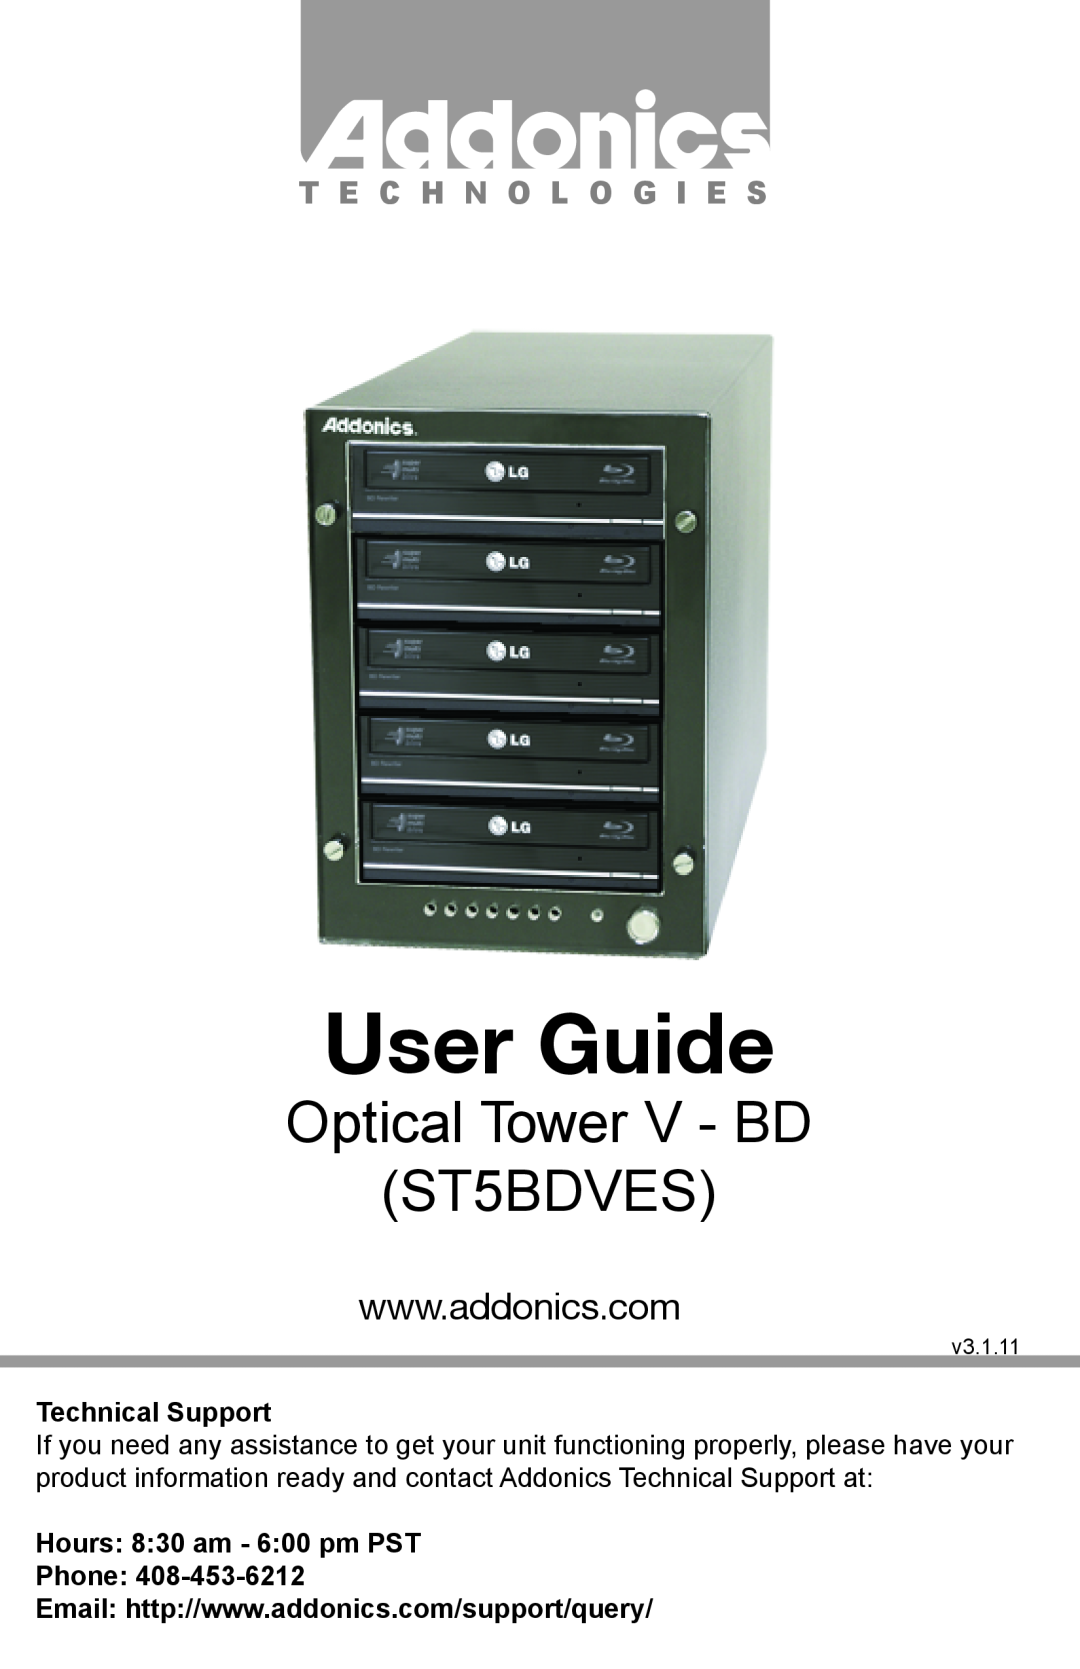 Addonics Technologies manual User Guide, Optical Tower V - BD ST5BDVES, T E C H N O L O G I E S, Technical Support 